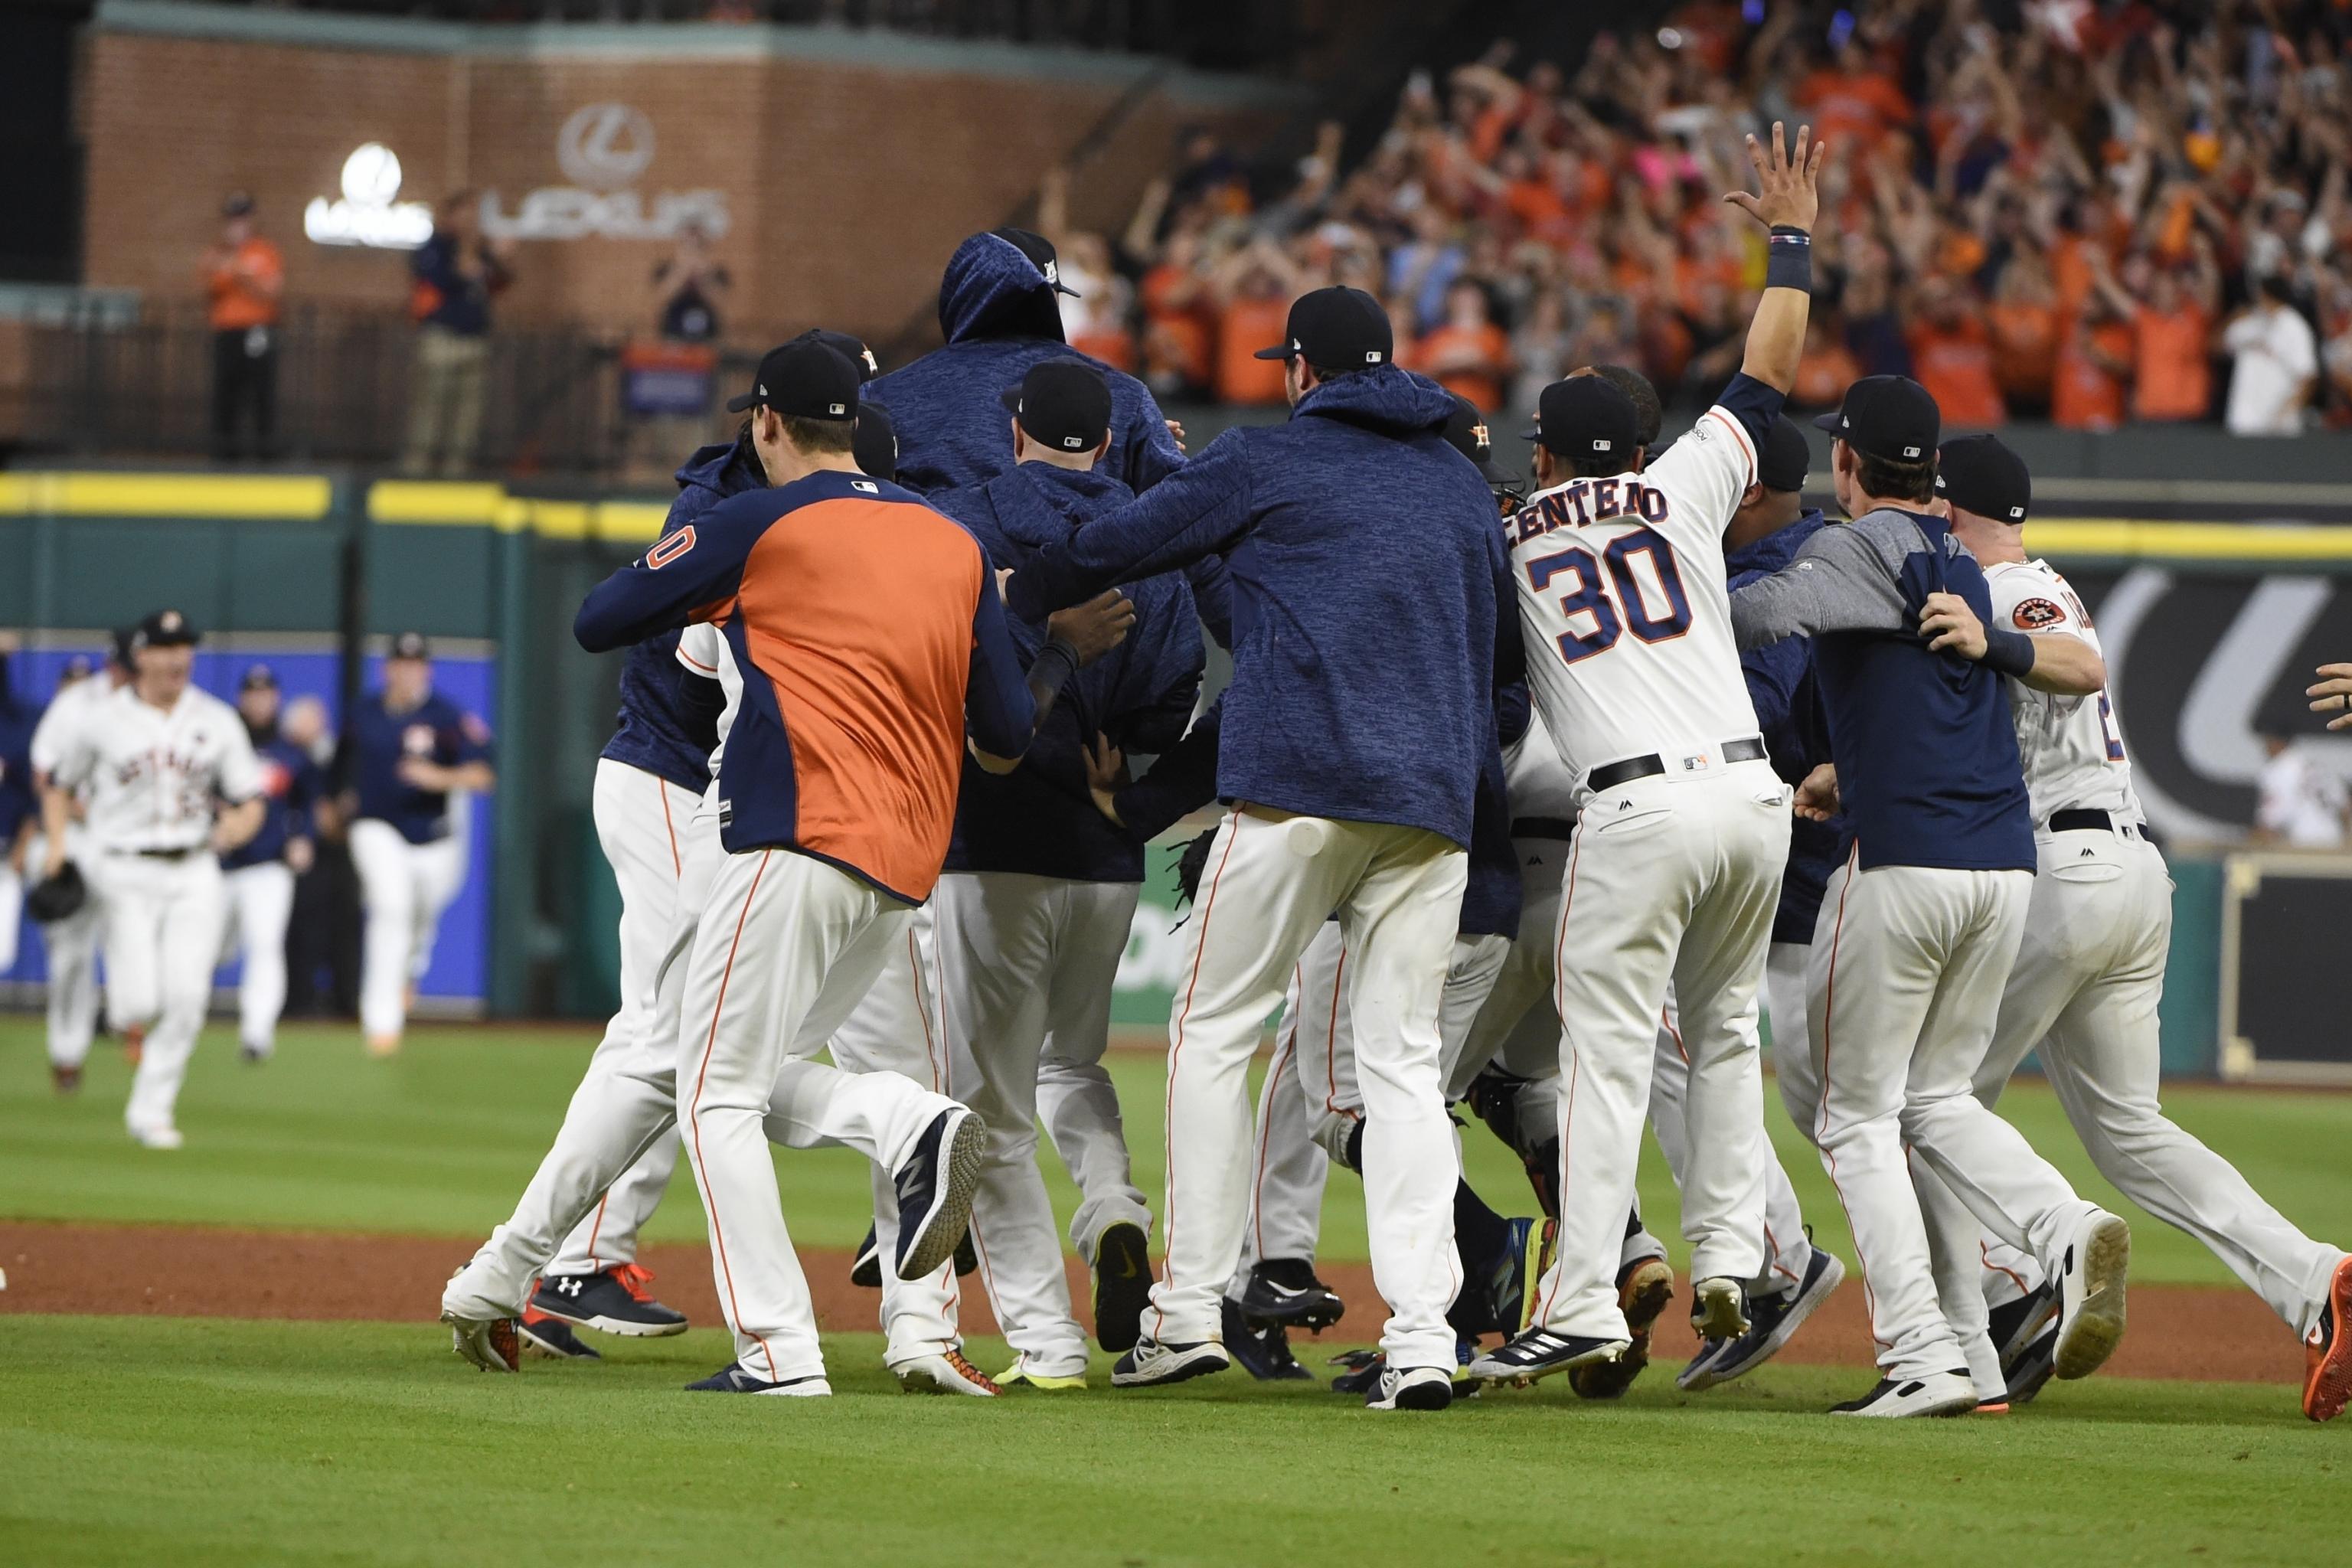 Houston Astros: Team to face Yankees for American League pennant